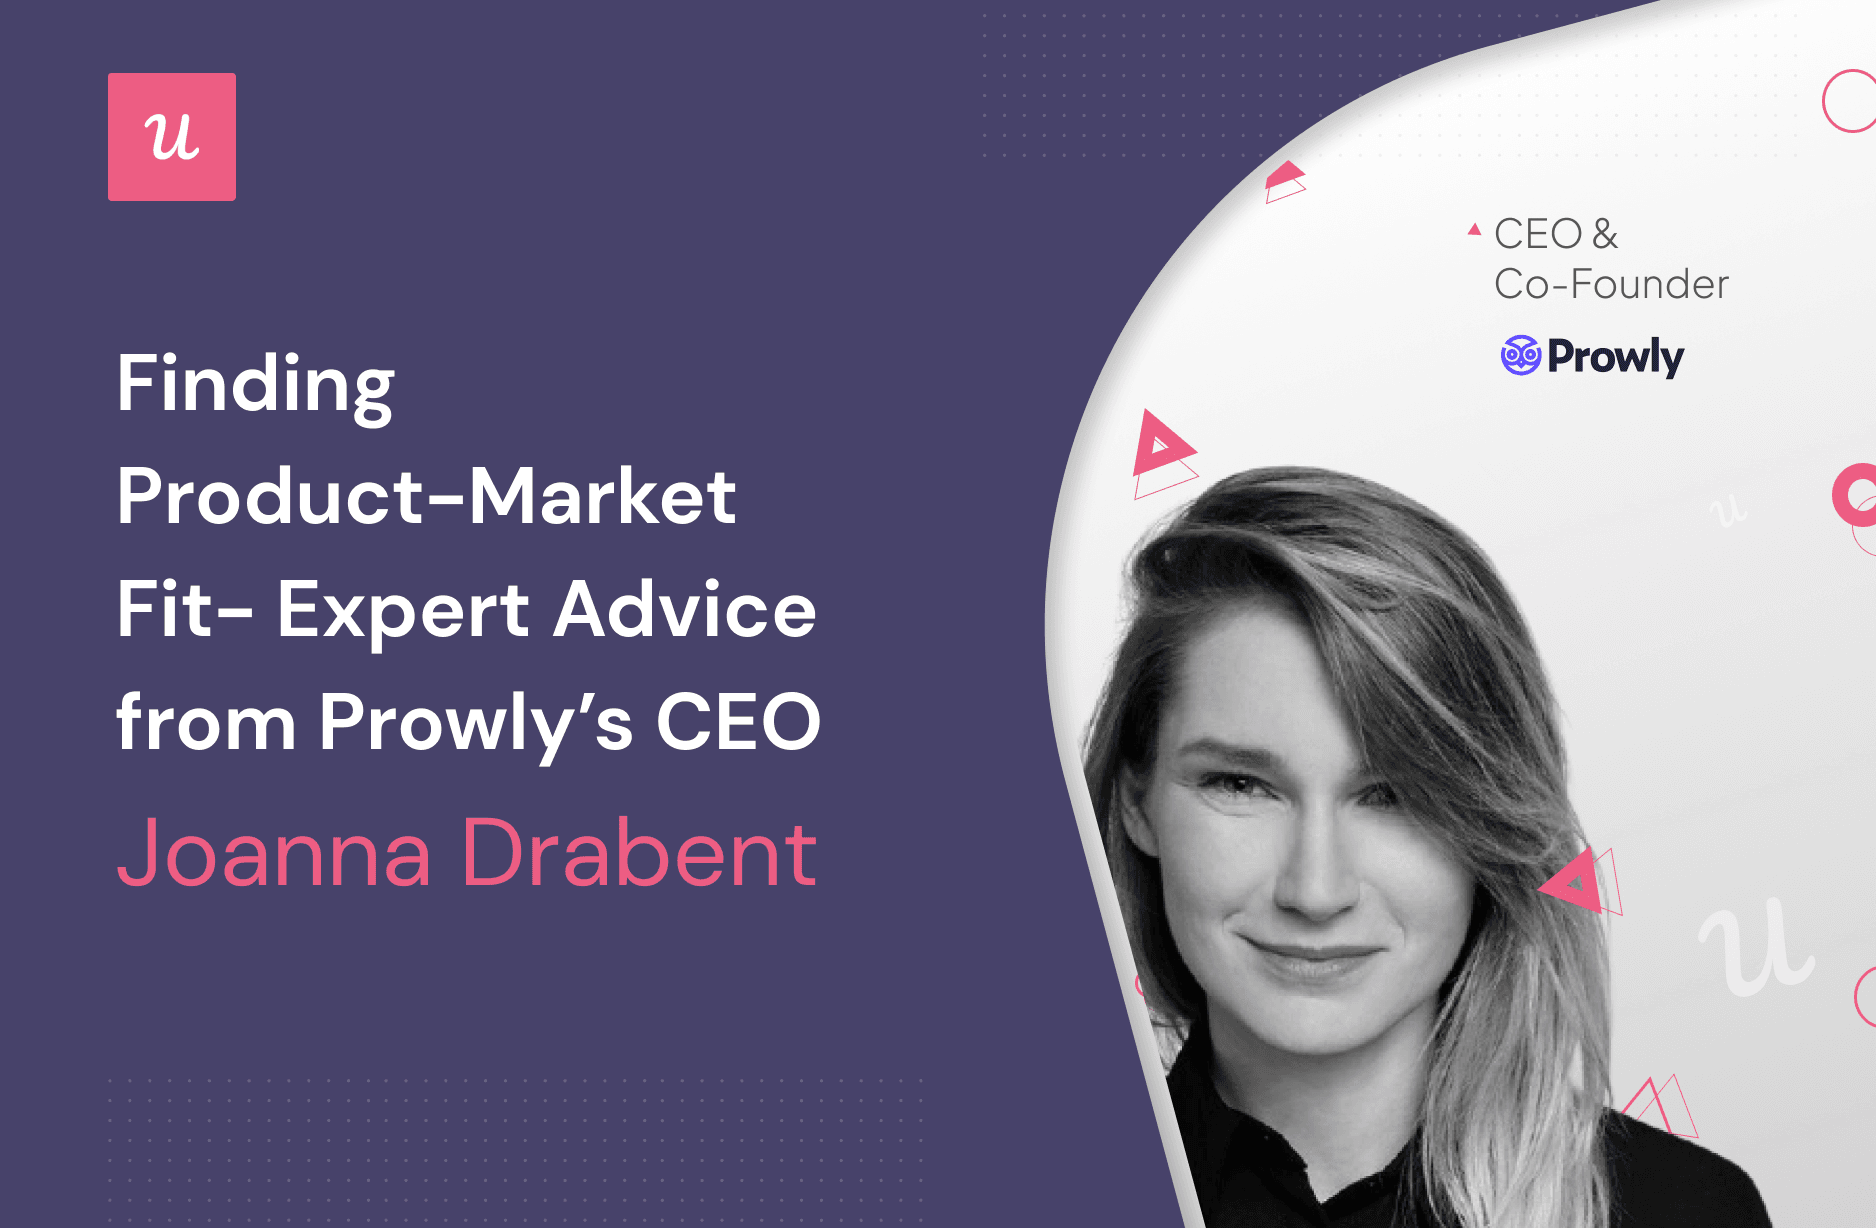 Finding Product-Market Fit - Expert Advice From Prowly’s CEO Joanna Drabent